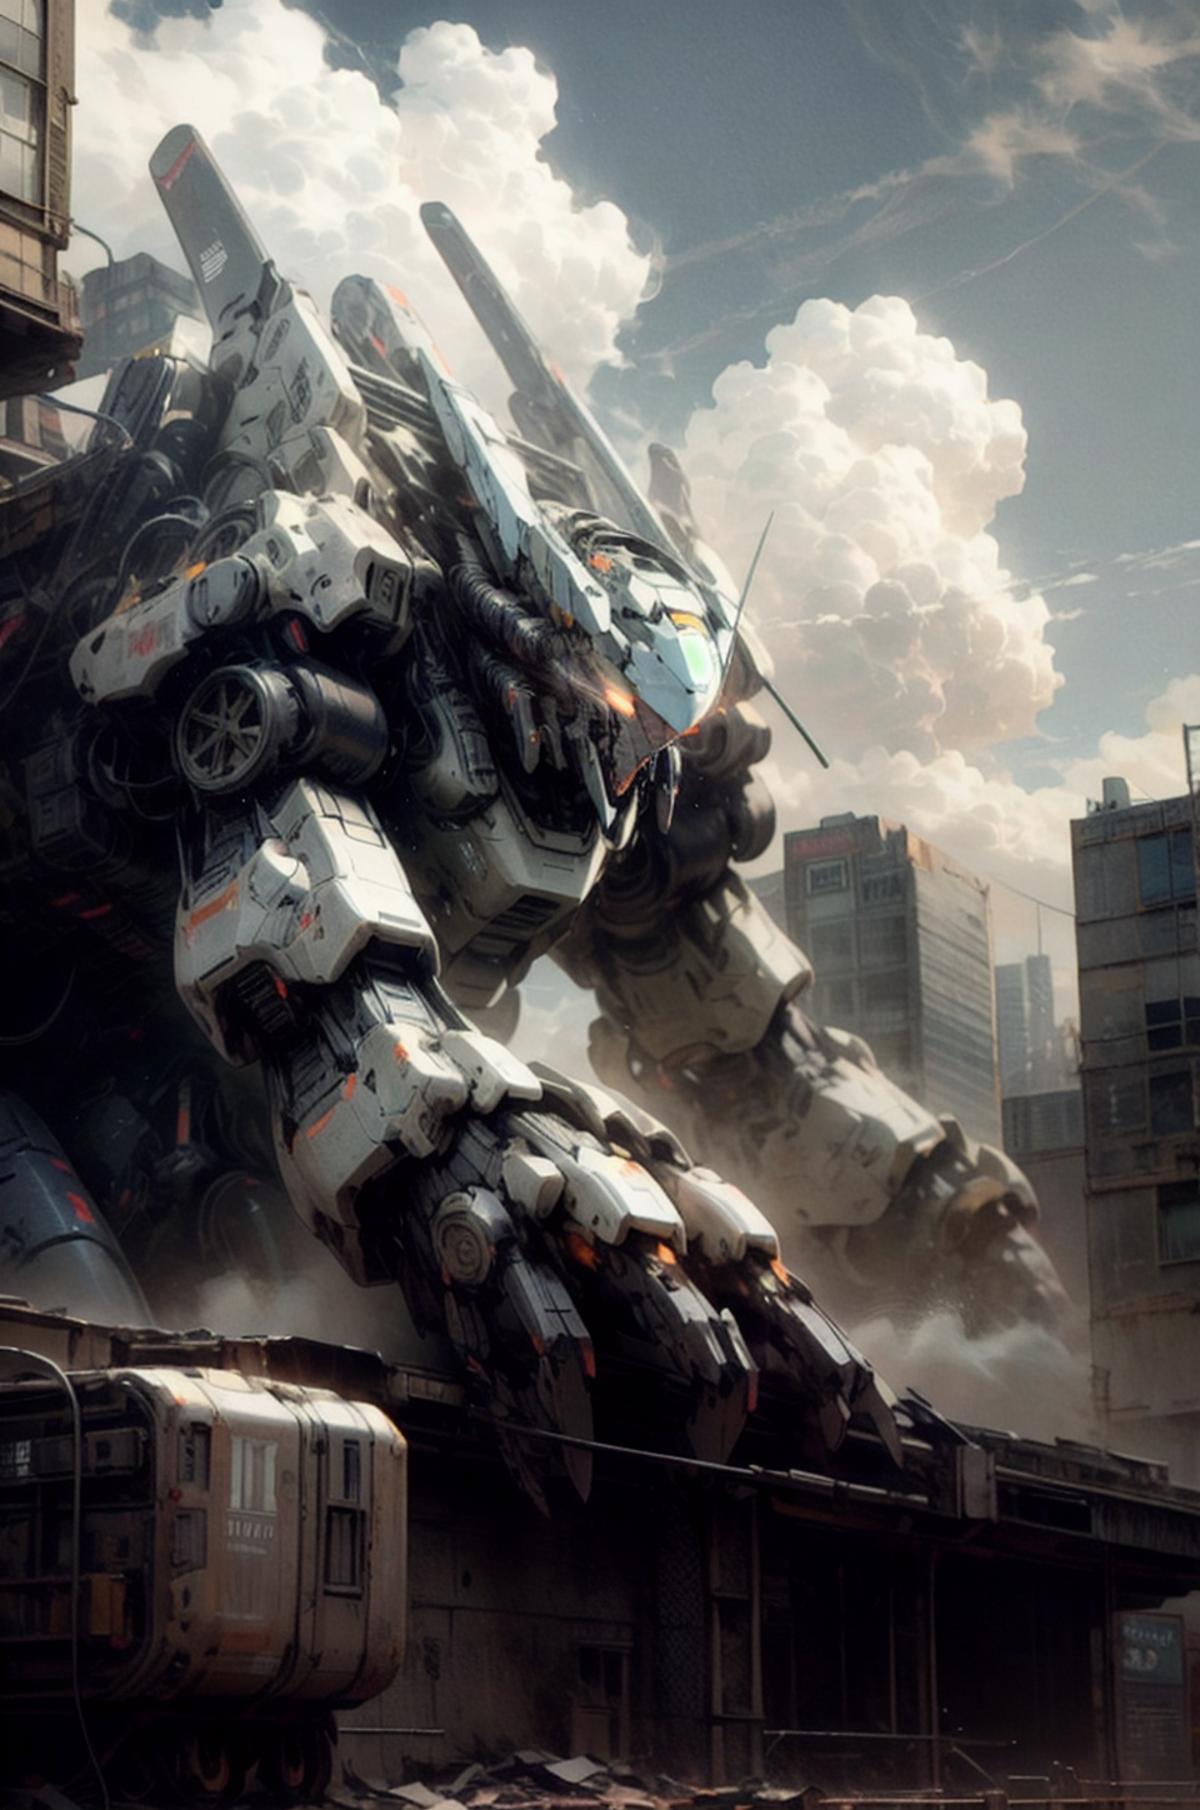 Mecha image by leif10epic